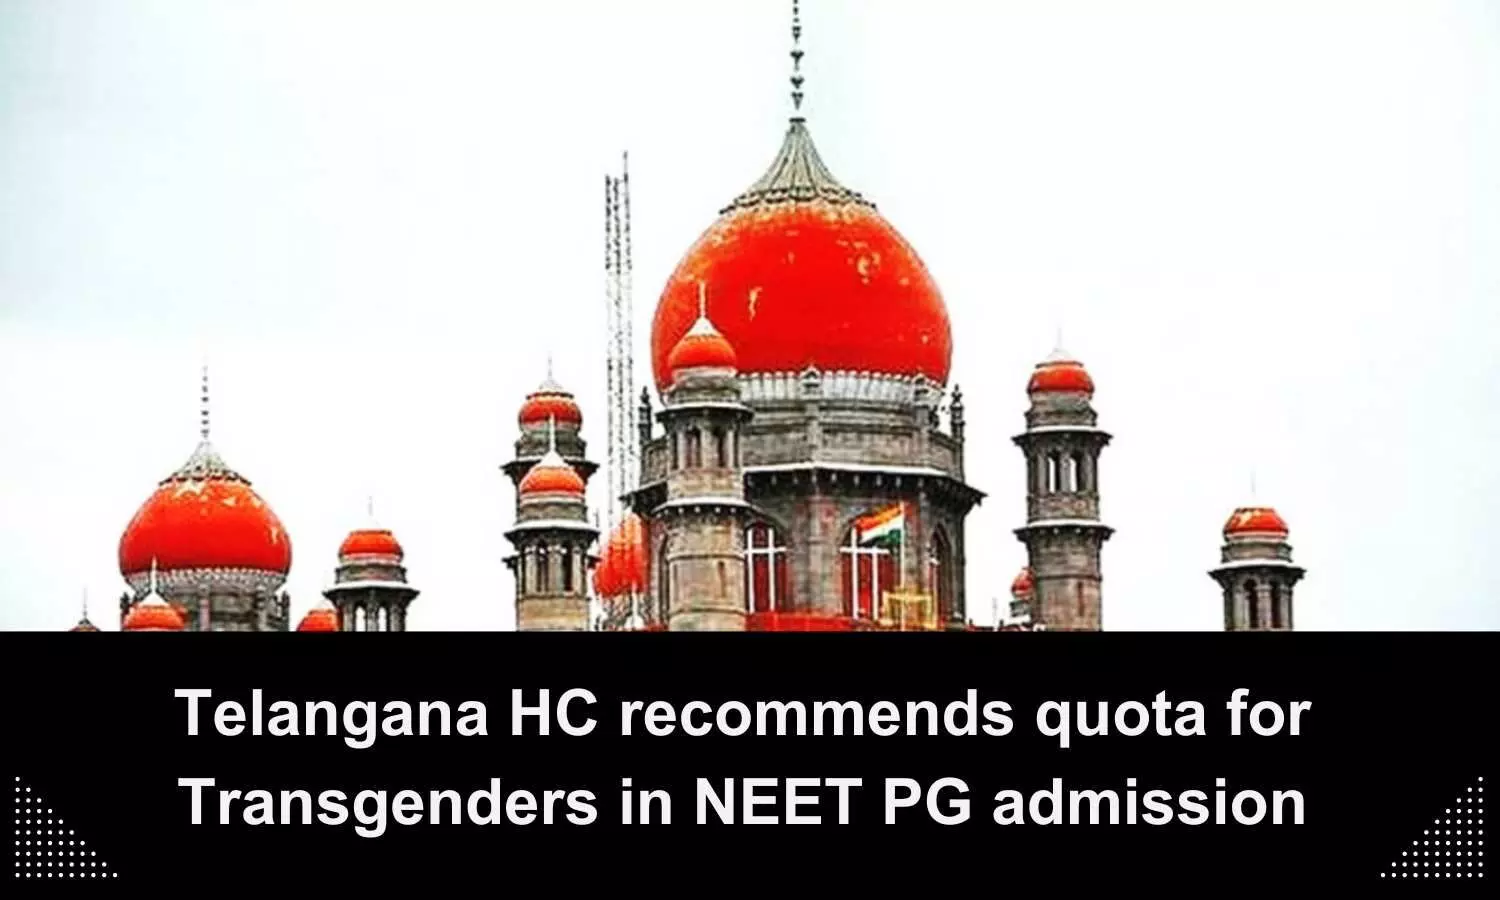 Telangana HC recommends quota for Transgenders in NEET PG admission